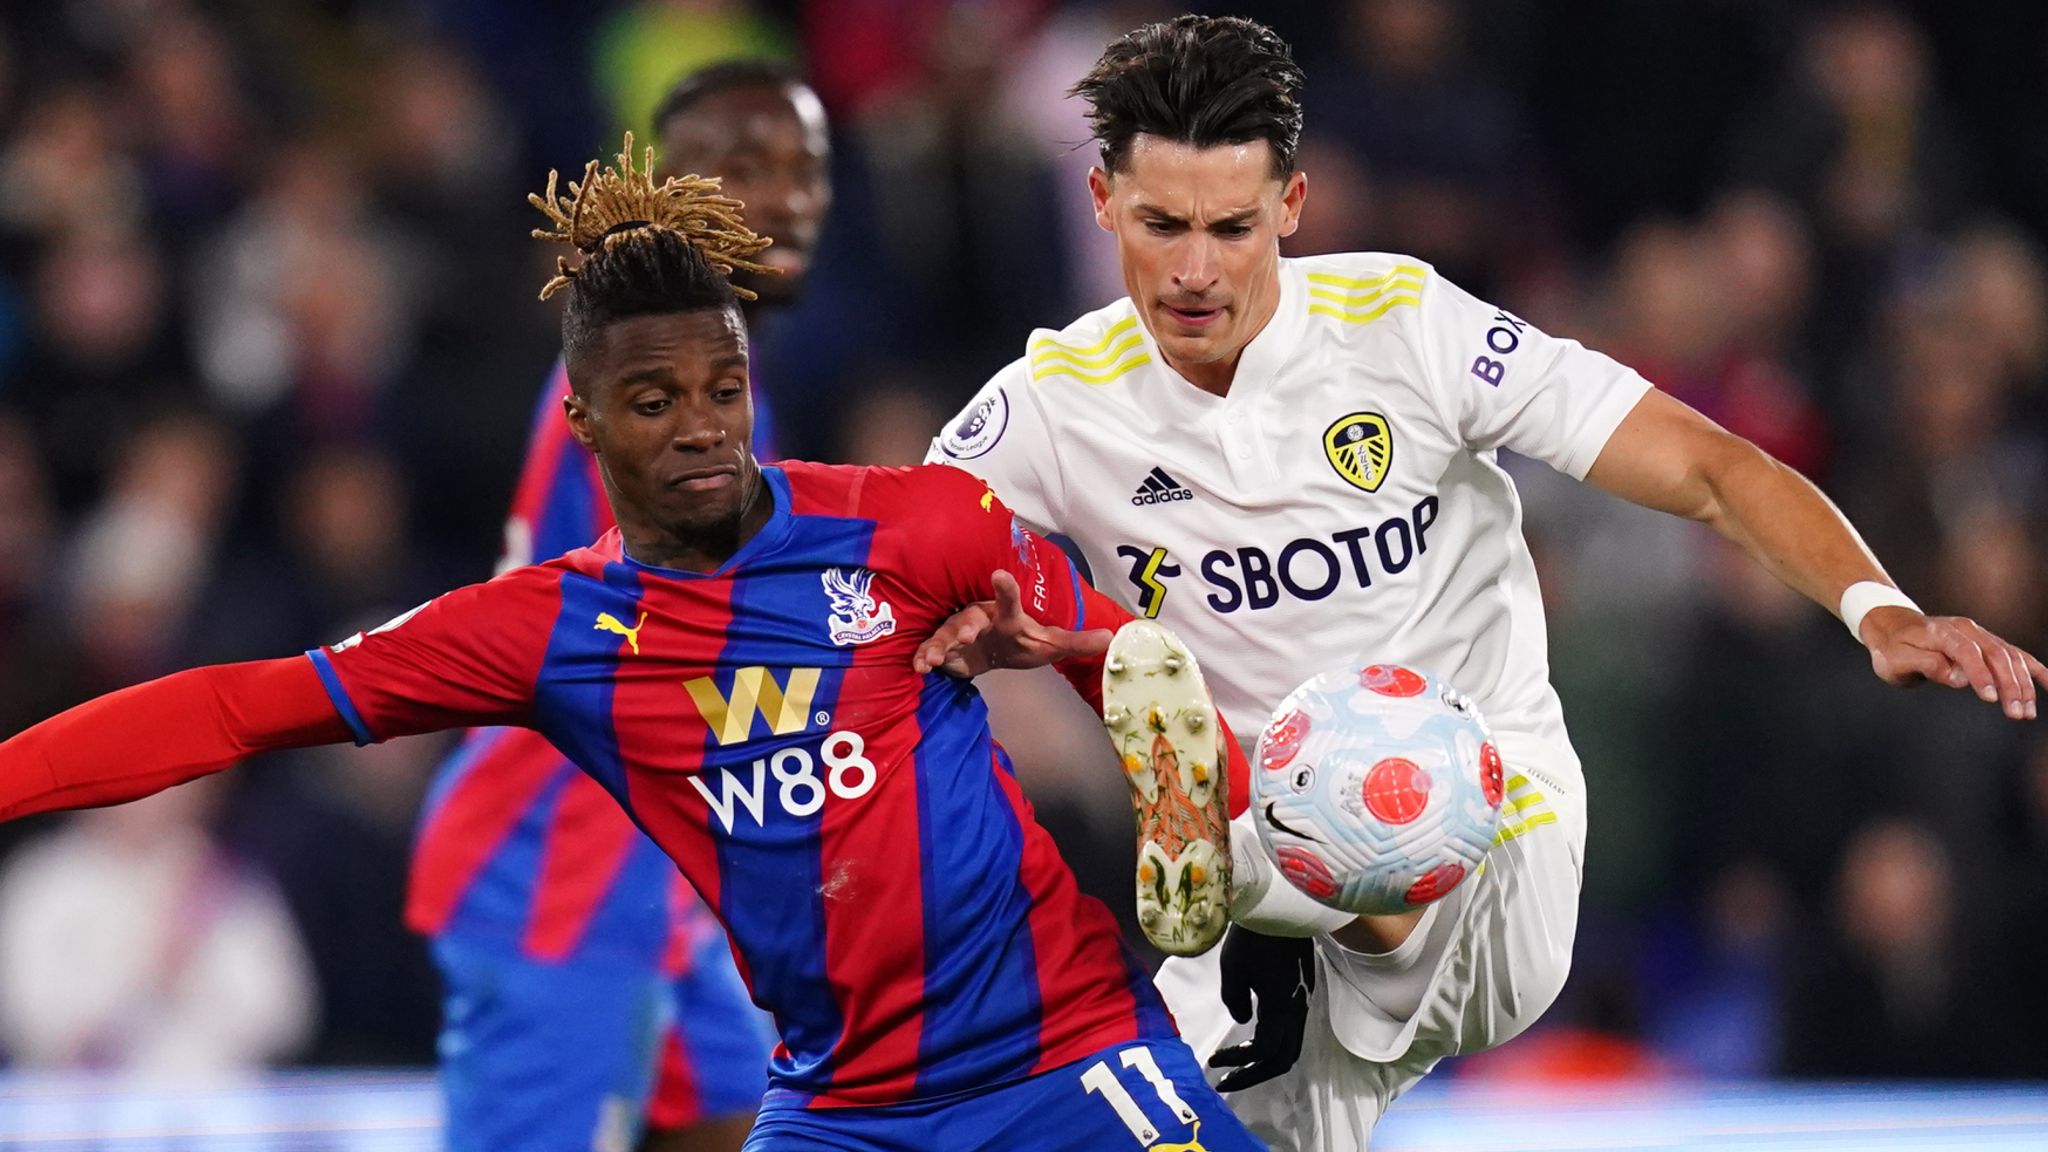 Crystal Palace 0-0 Leeds: Jesse Marsch's side hold on for draw at Selhurst Park to go five points clear of relegation zone | Football News | Sky Sports